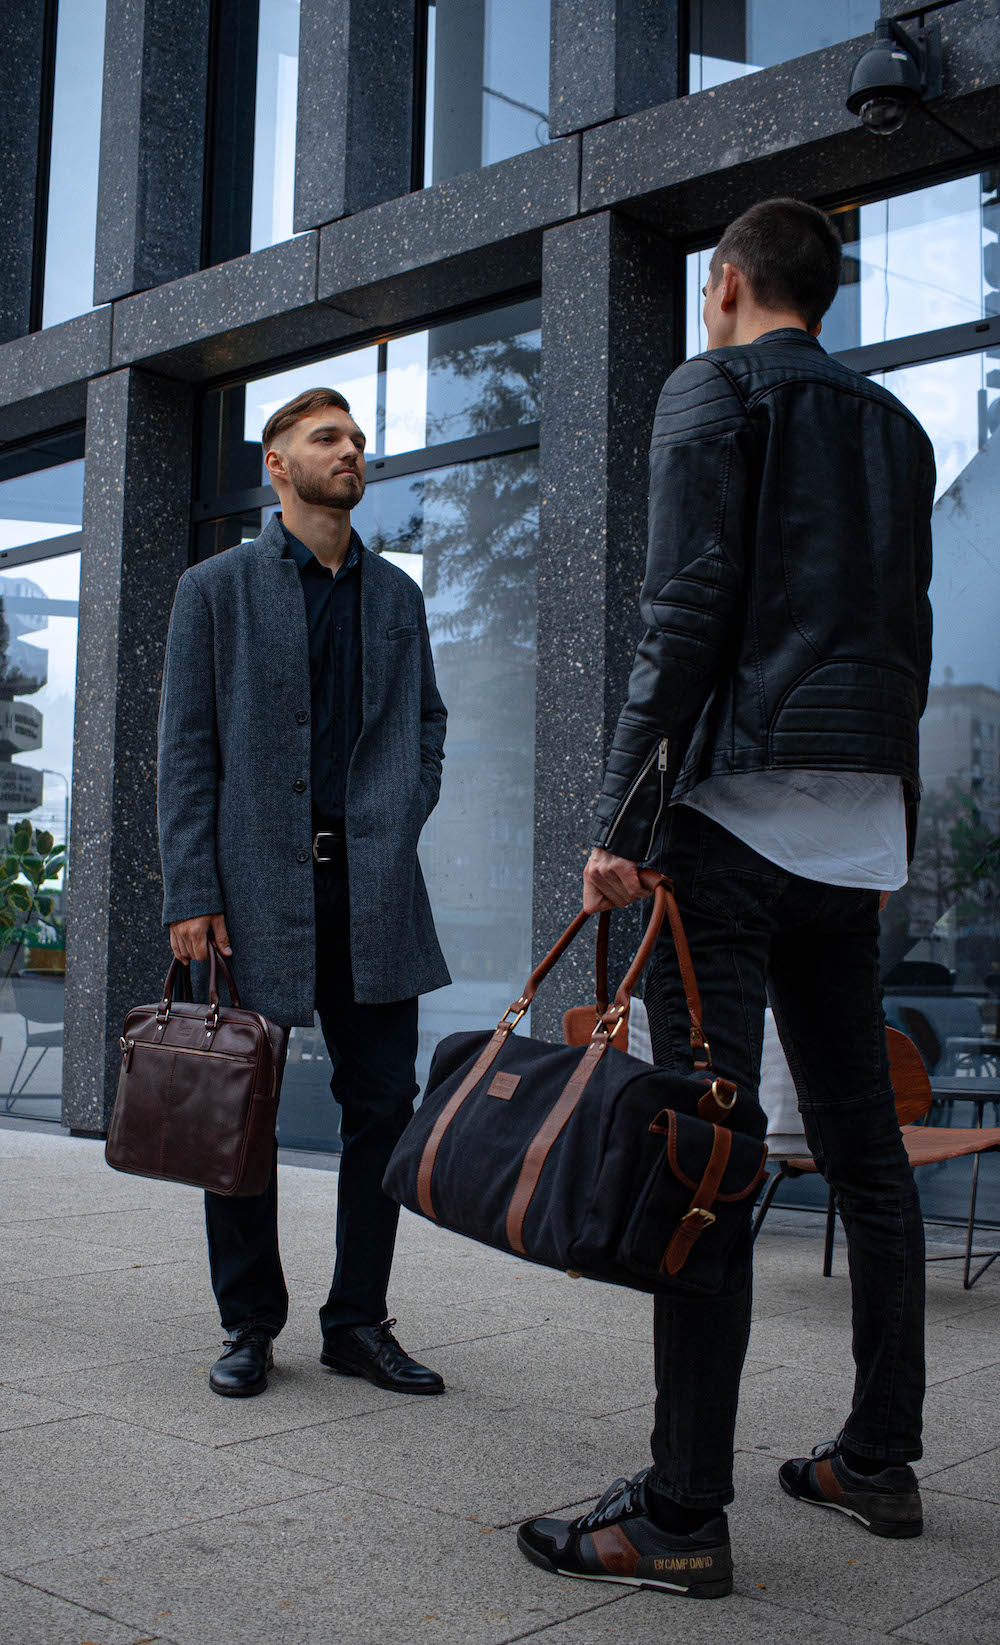 How to choose the right stylish men's bag for every outfit